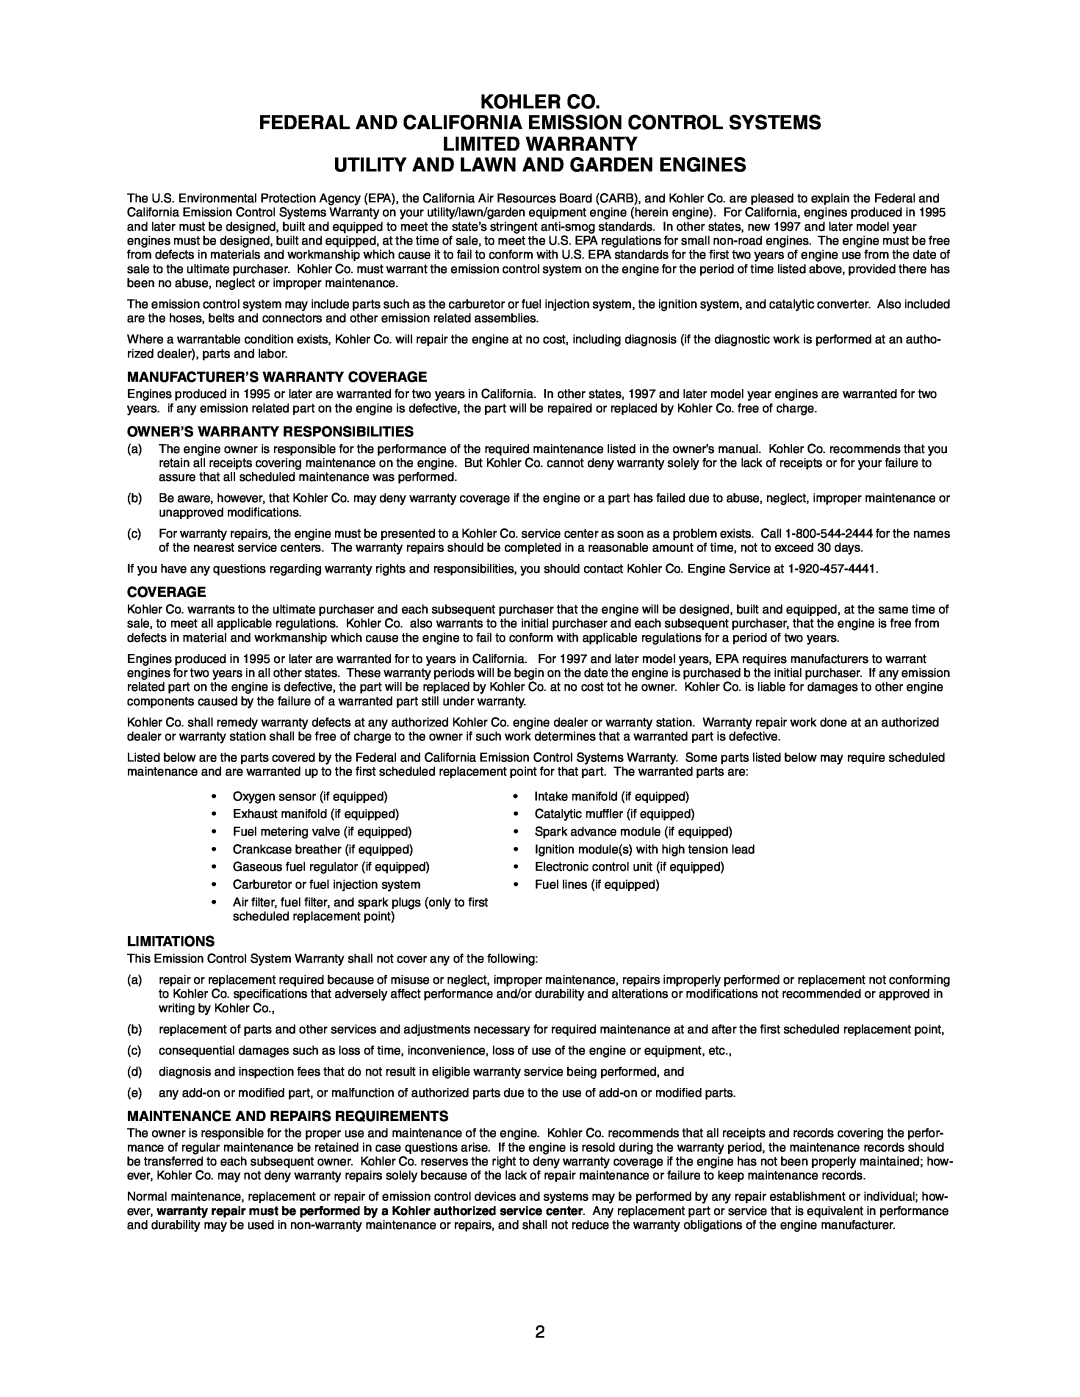 Cub Cadet 2176 manual Manufacturer’S Warranty Coverage, Owner’S Warranty Responsibilities, Limitations 